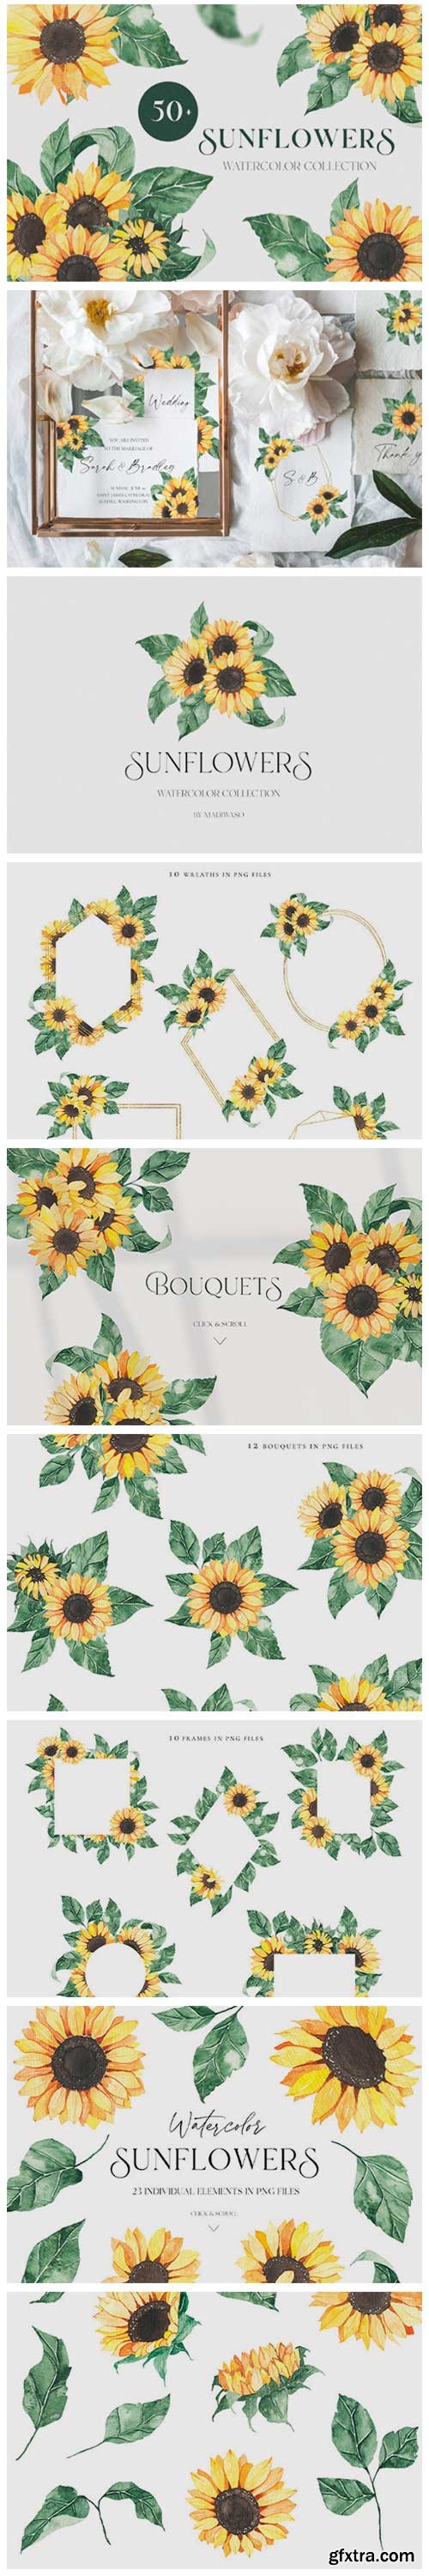 Watercolor Sunflowers Collection 4383192